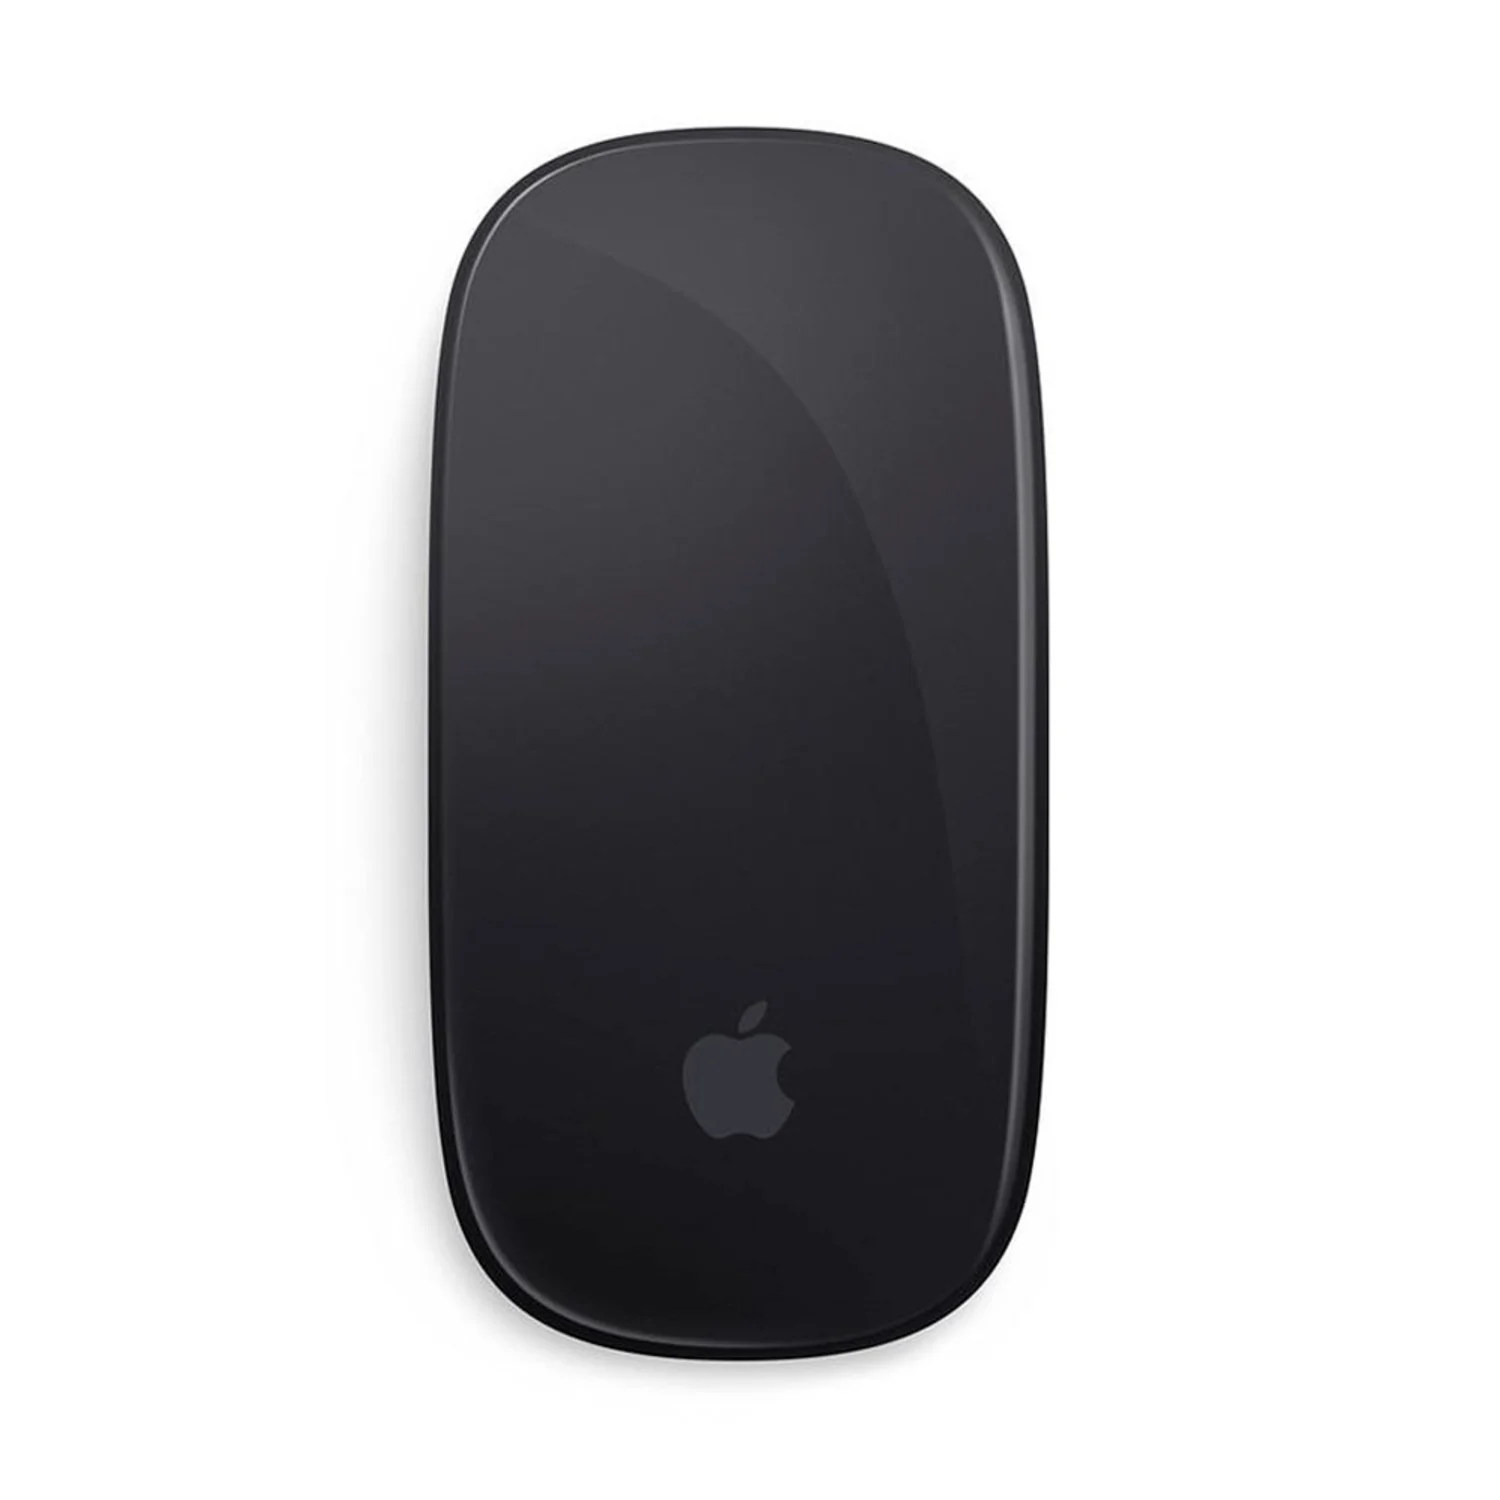 Mouse Apple Magic 2 MRME2BE/A Bluetooth - Space gray